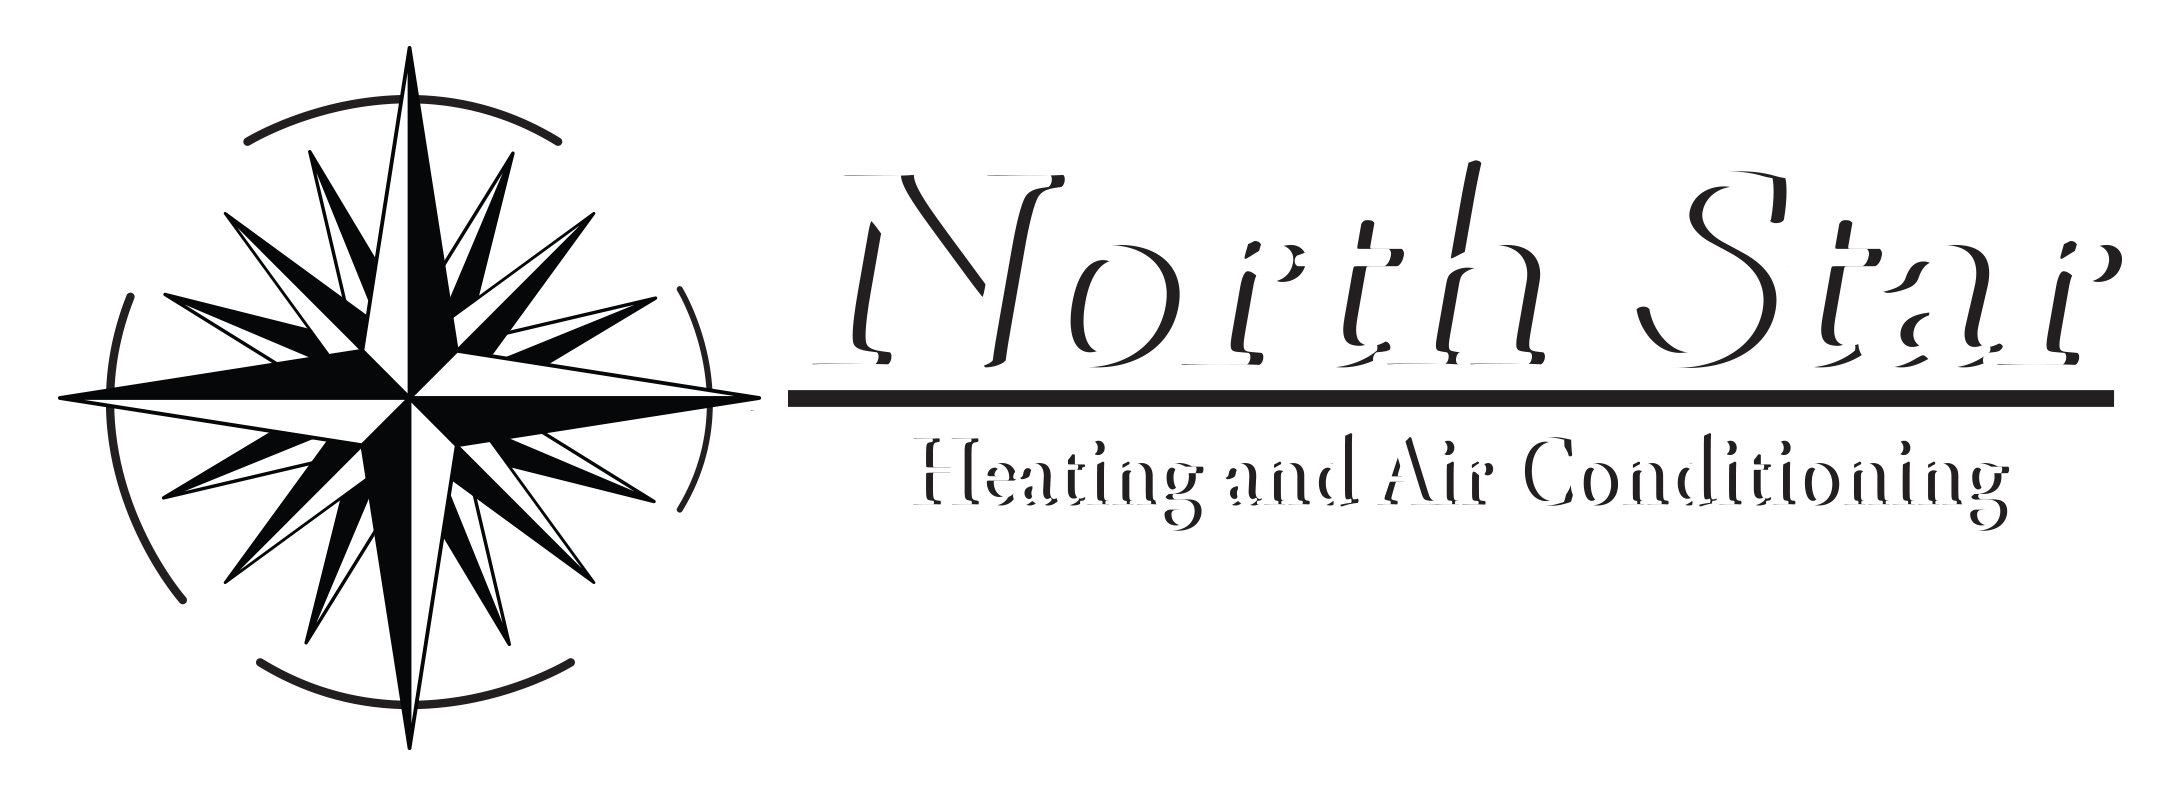 North Star Heating and Air Conditioning